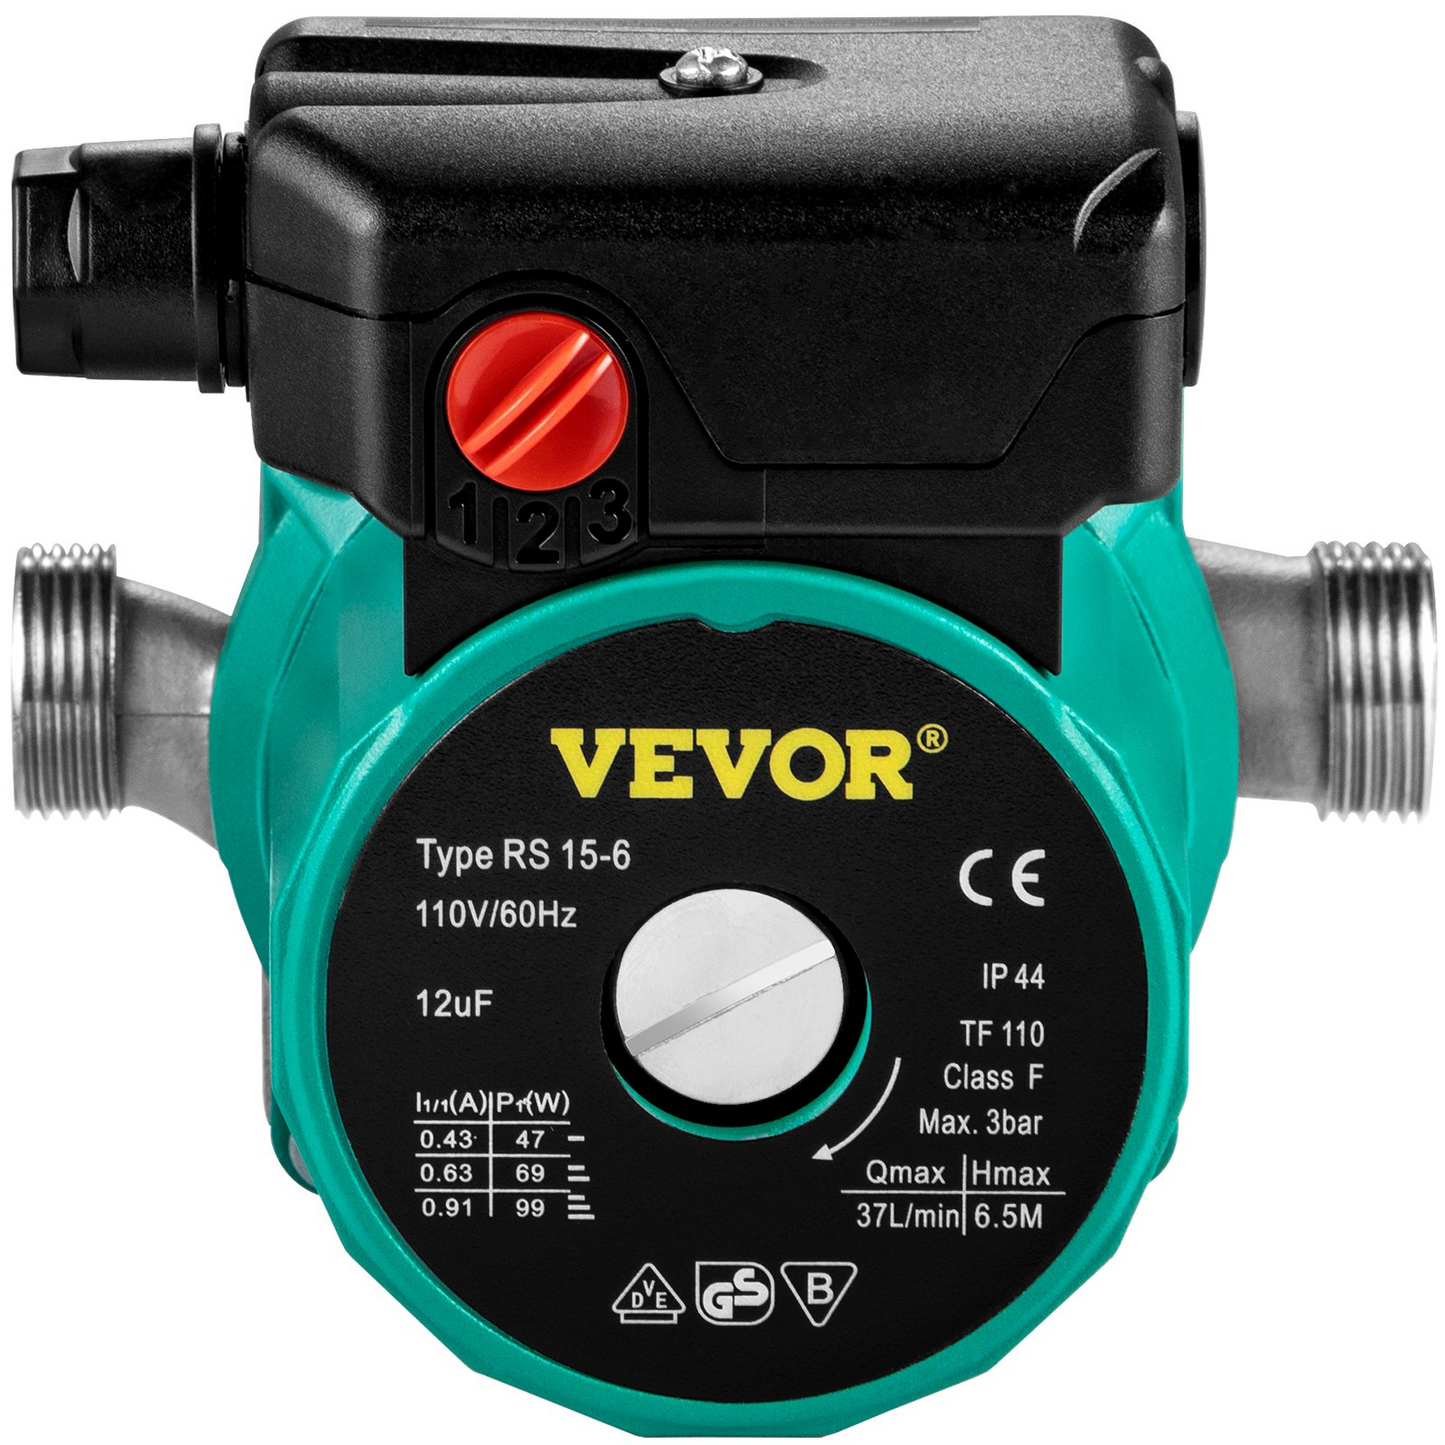 VEVOR Hot Water Recirculating Pump, 93W 110V Water Circulator Pump, Automatic Start Circulating Pump NPT 3/4" w/Brass Fittings, Stainless Steel Head, 3 Speed Control for Electric Water Heater System, Goodies N Stuff